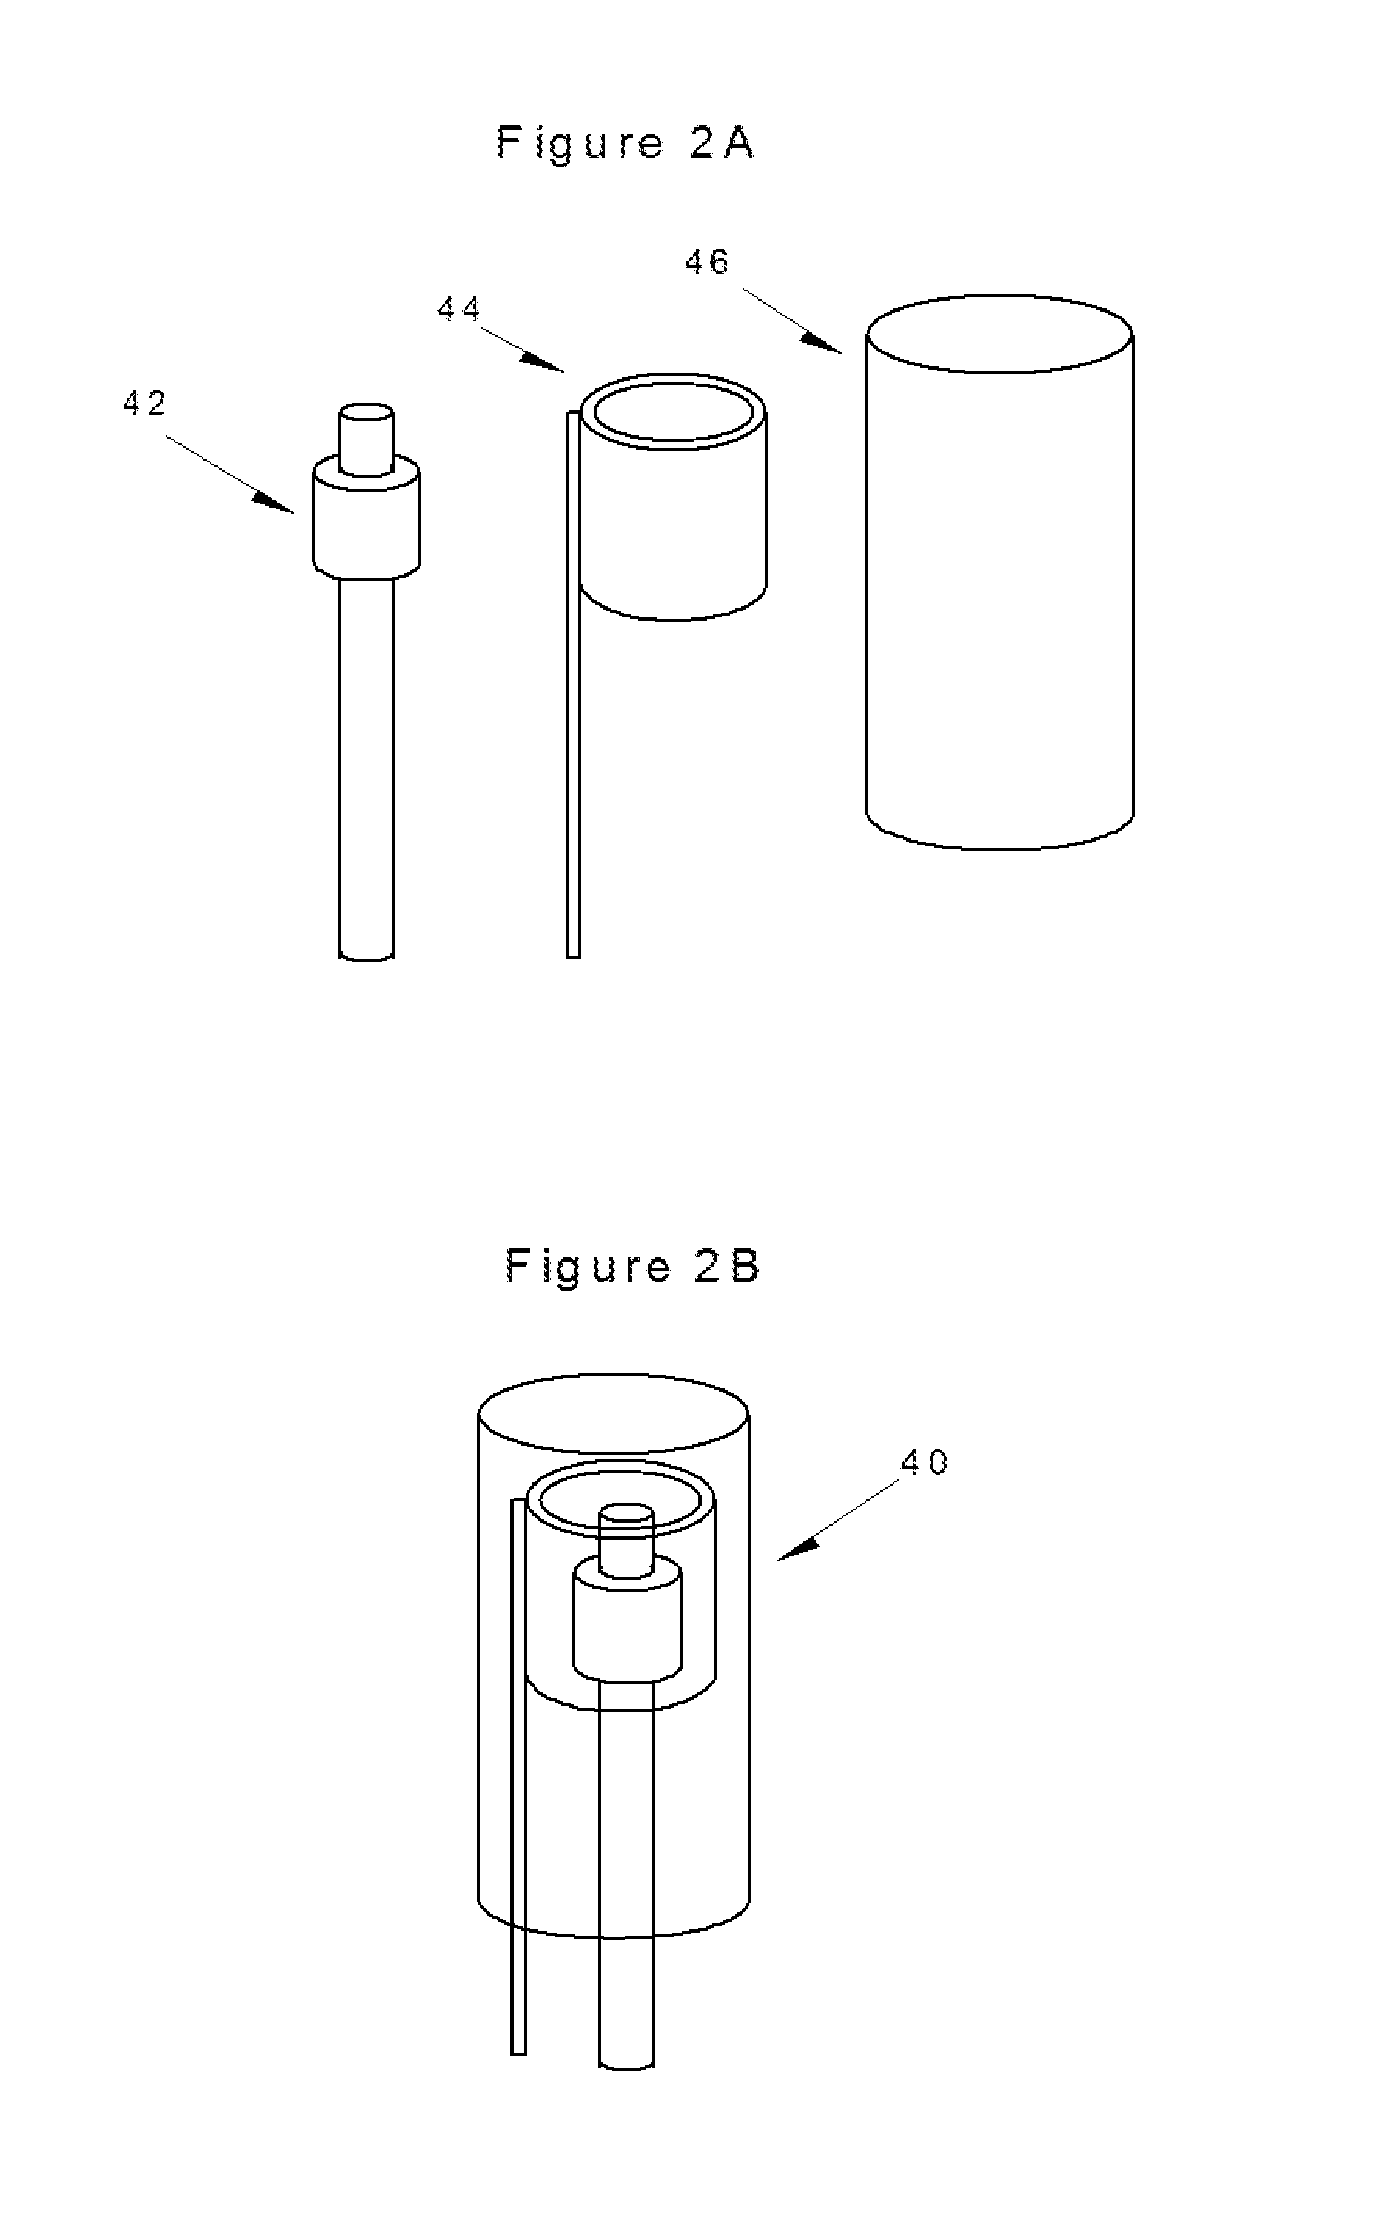 Projectile weapon training apparatus using visual display to determine targeting, accuracy, and/or reaction timing